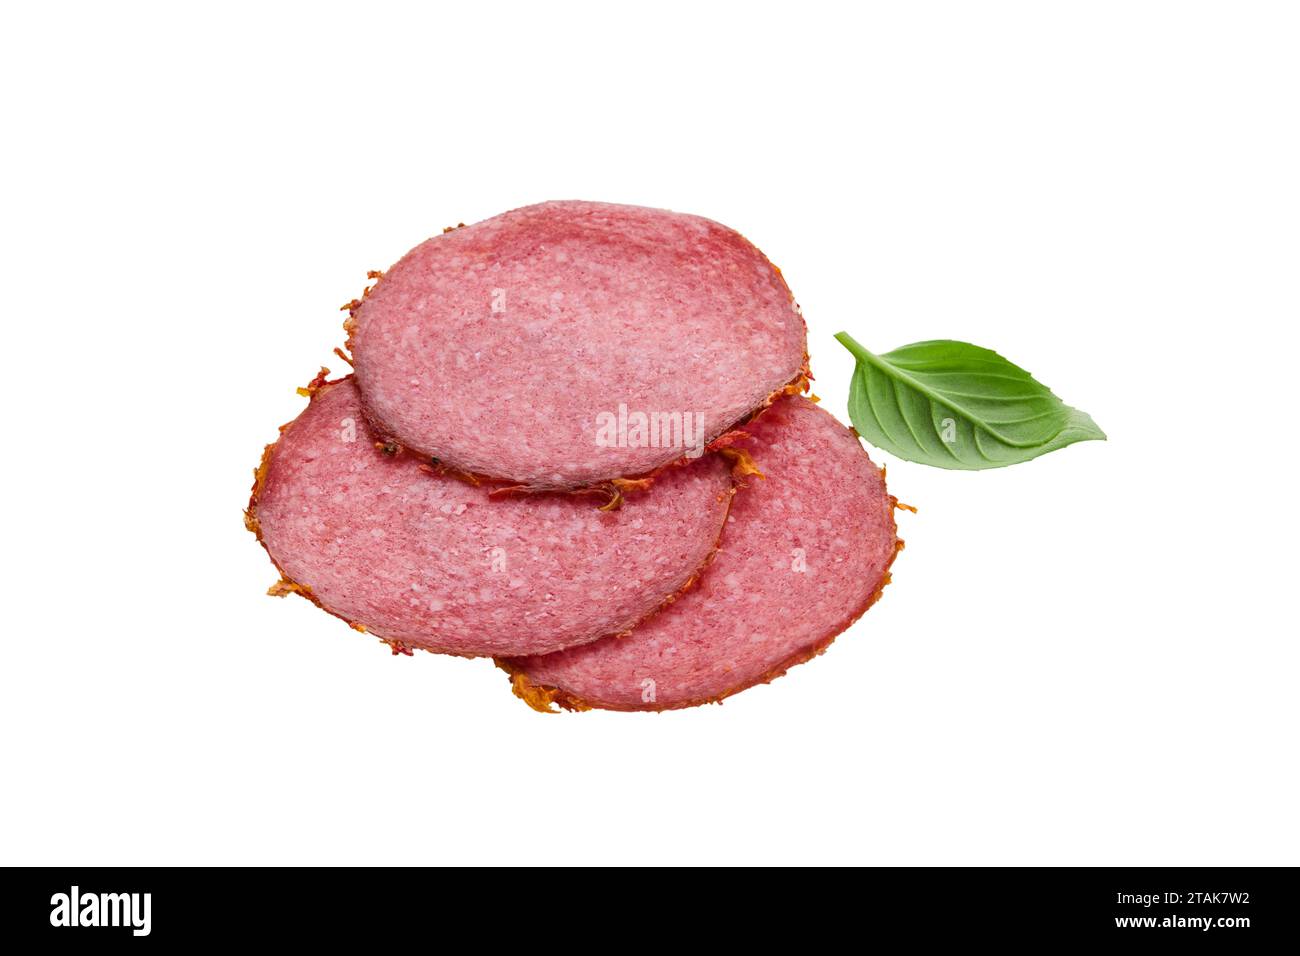 Salami sausage slices and leaf green basil isolated on white background. Few pieces or several slices. High resolution image. Can be used for self-des Stock Photo